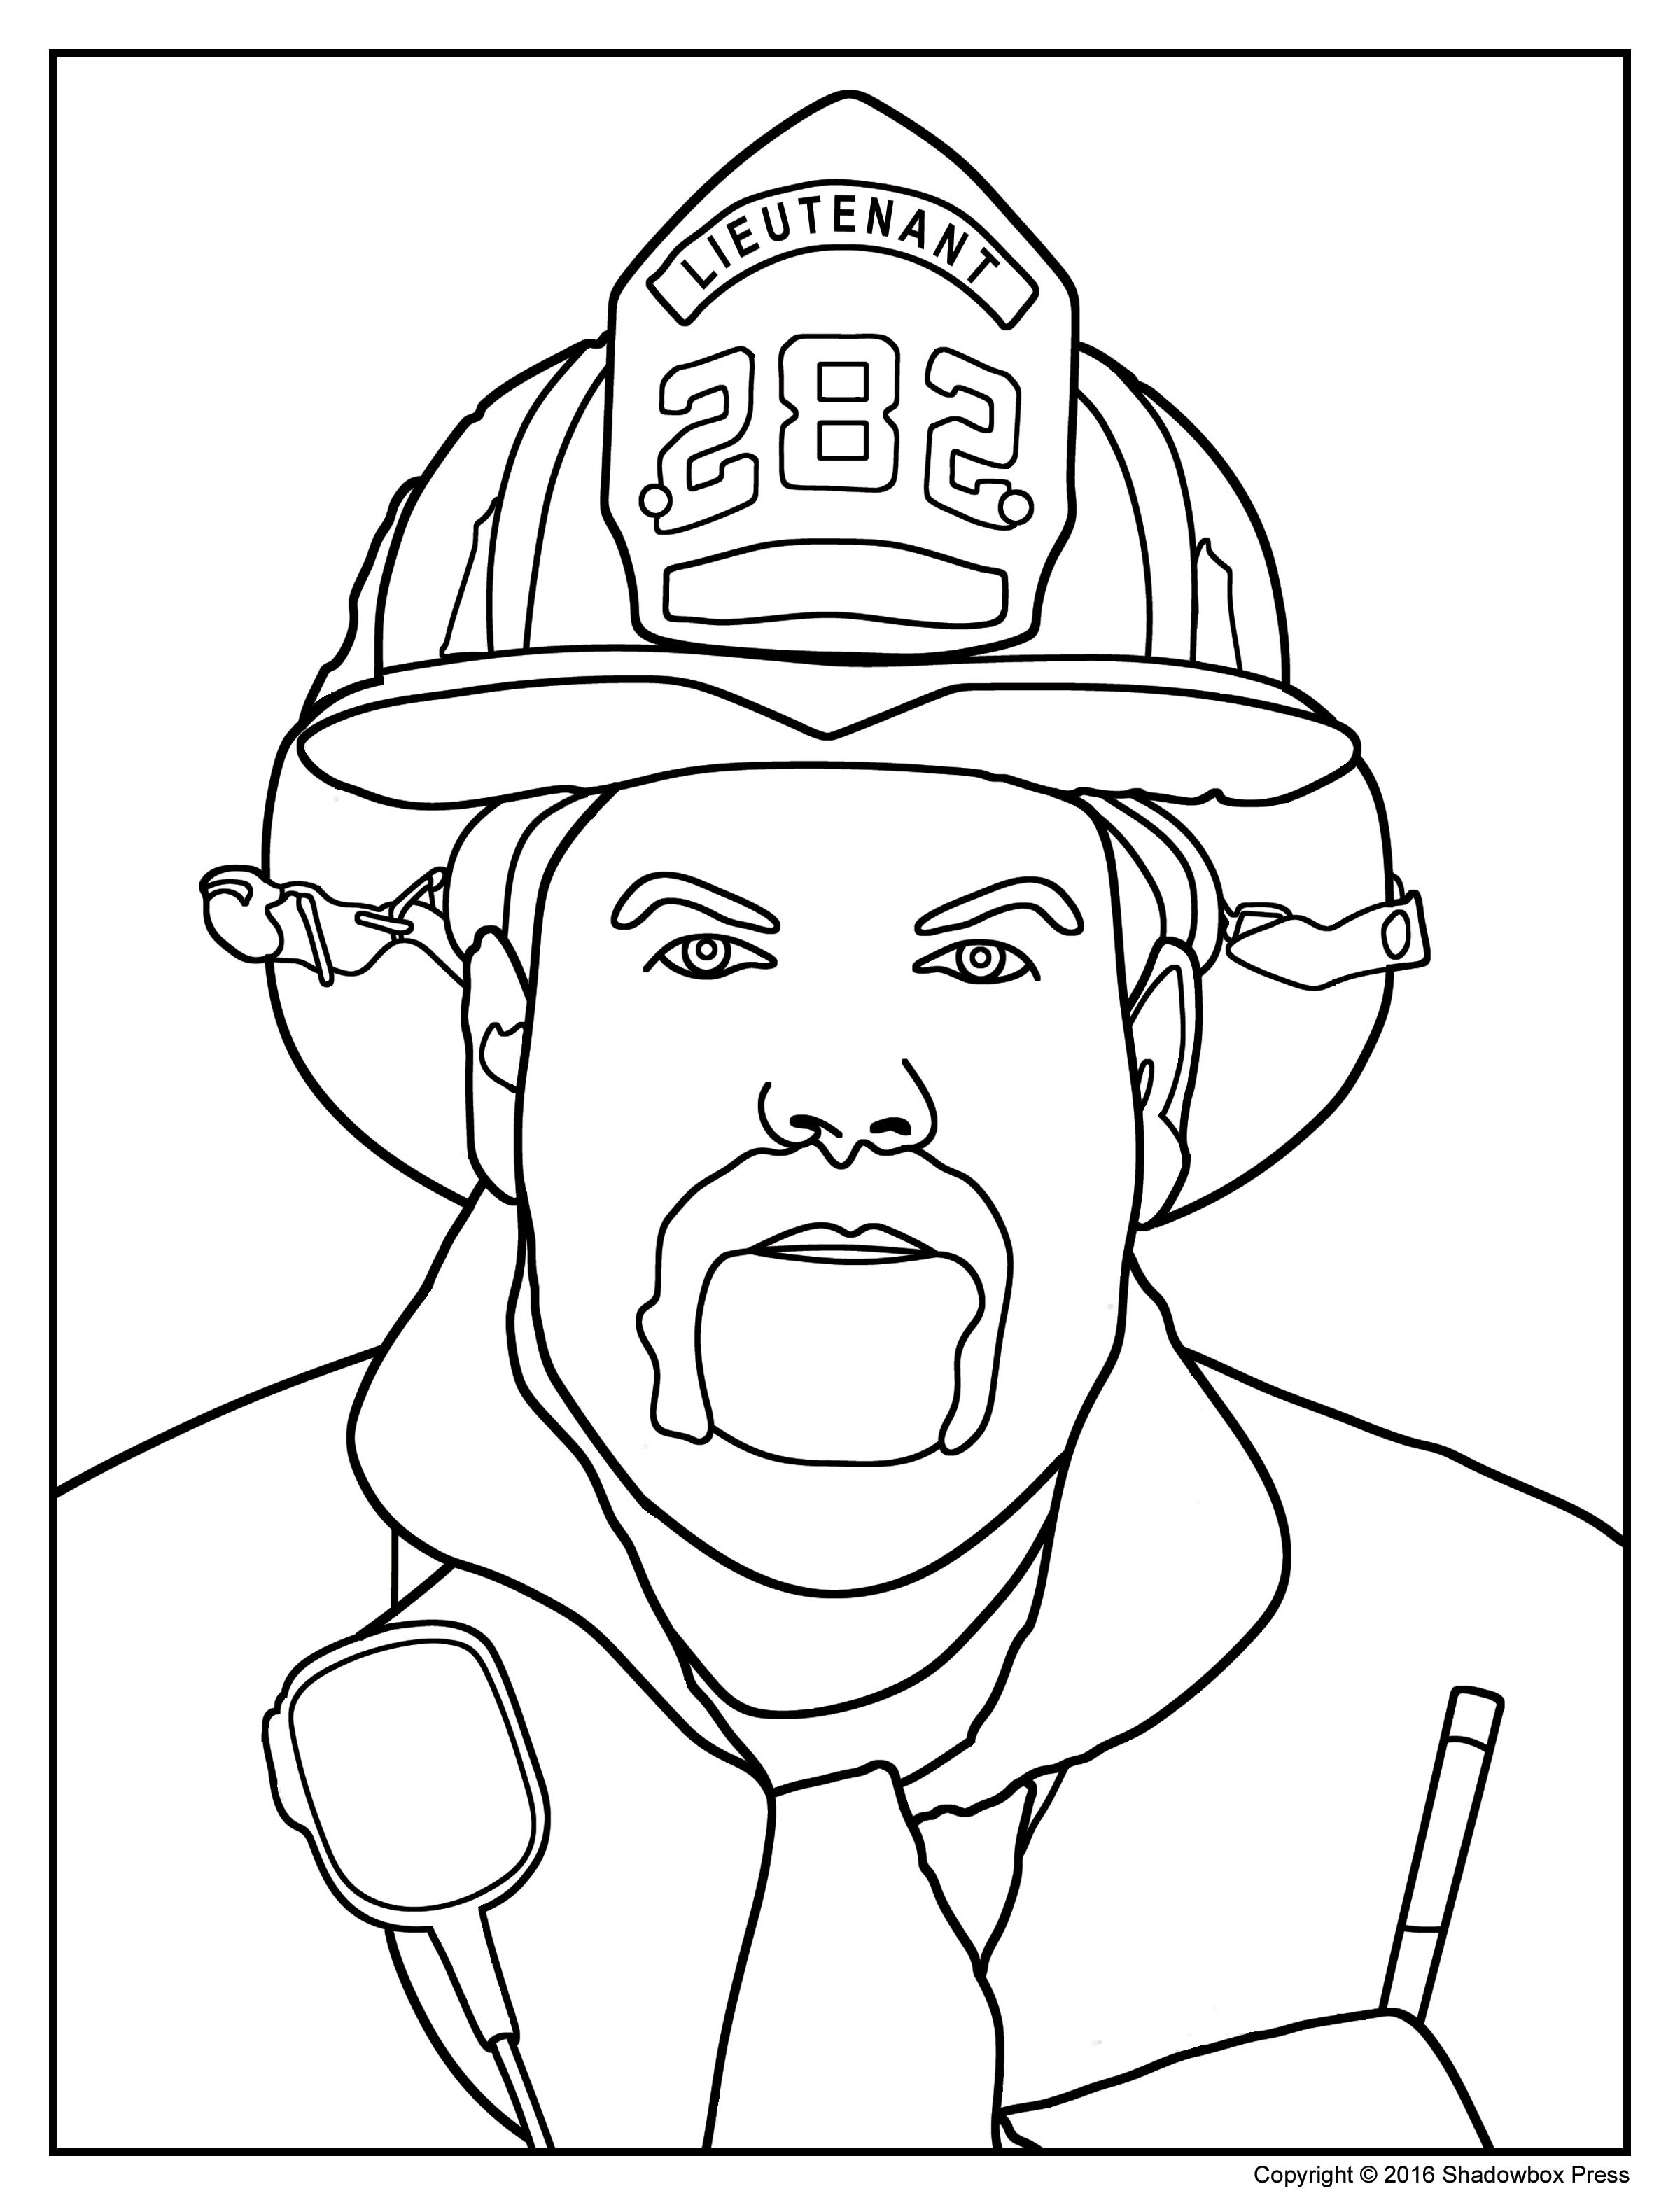 Printable Firefighter Coloring Pages at Free